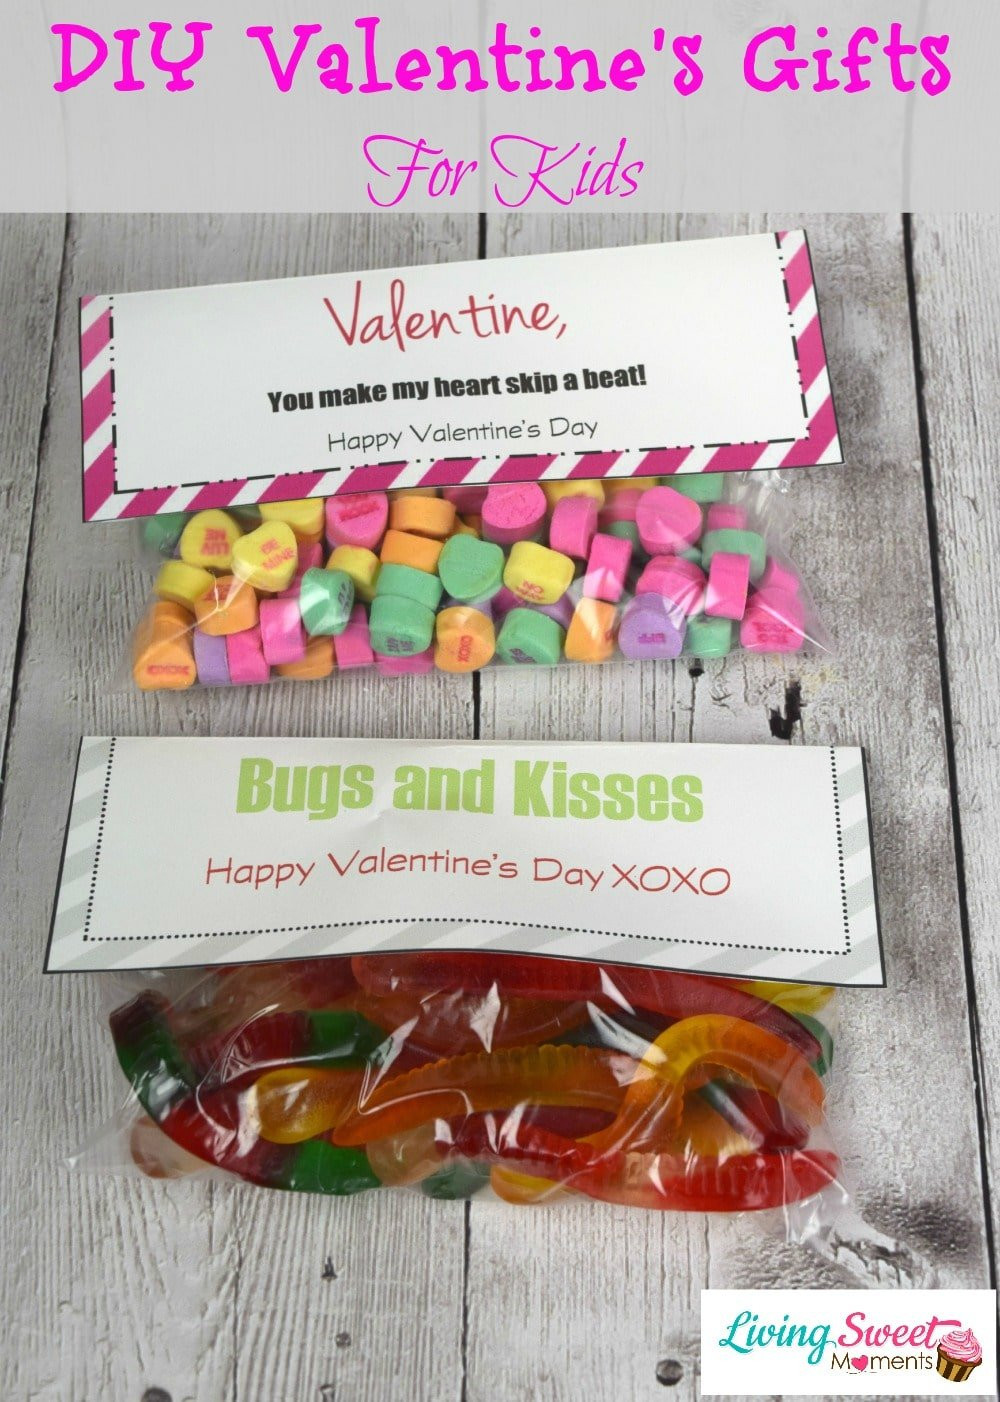 Gift Ideas For Kids For Valentines Day
 DIY Valentine s Gift For Kids